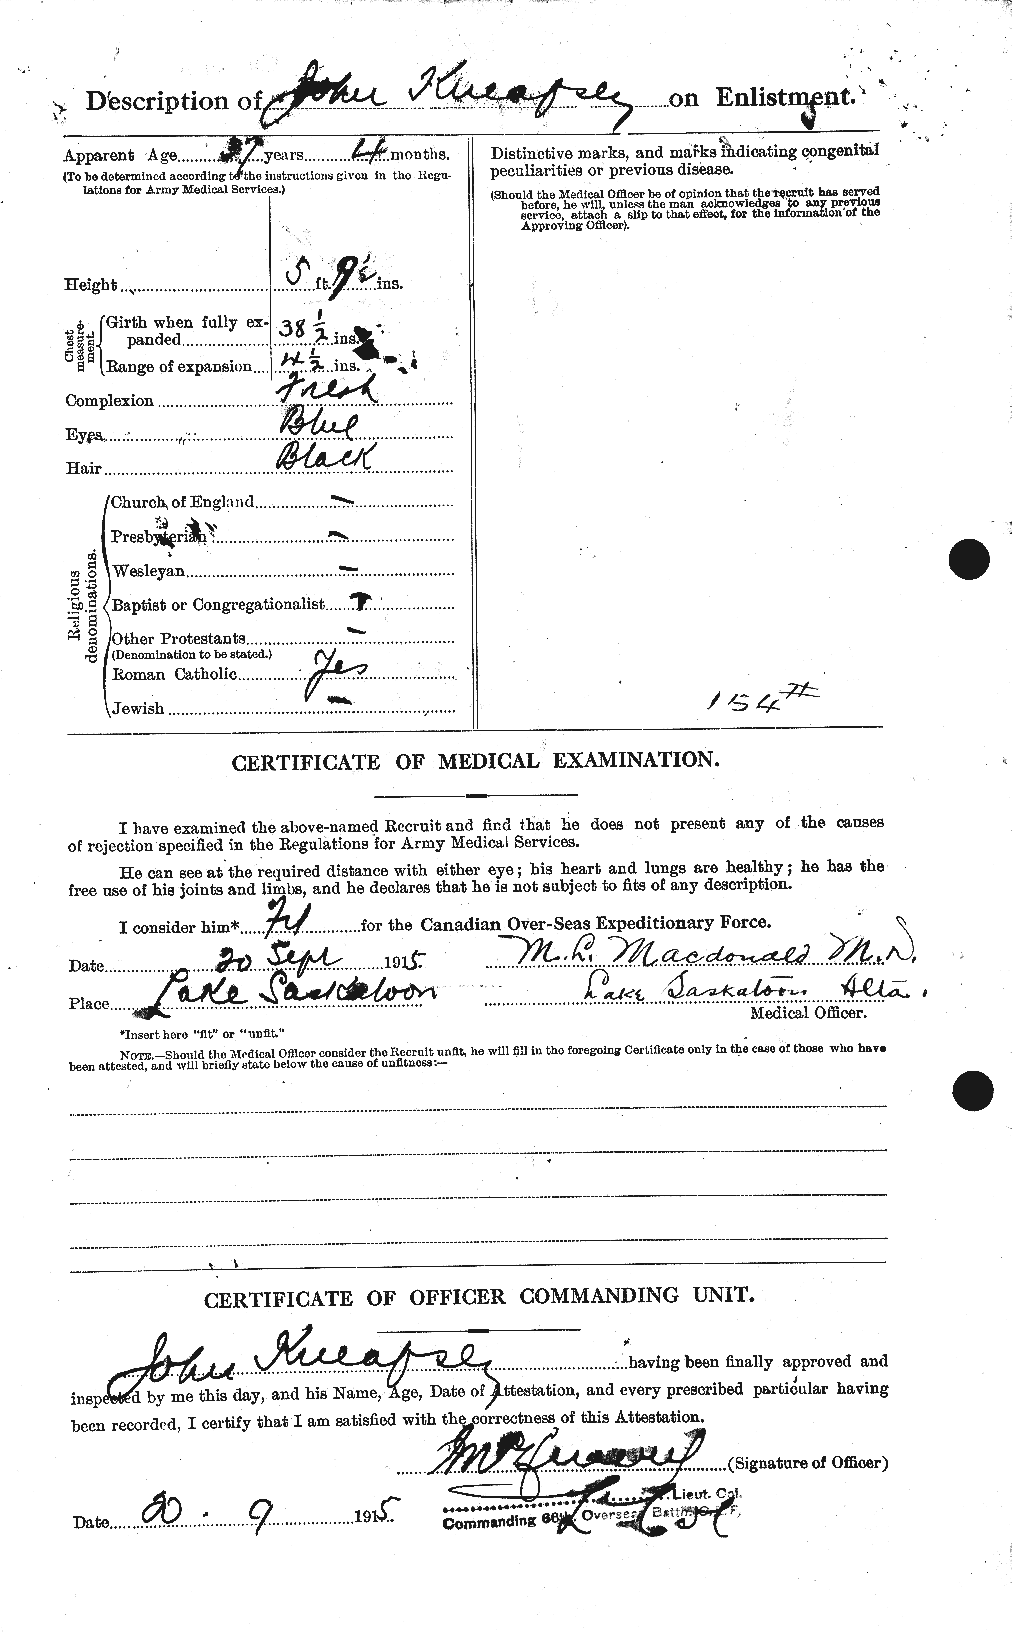 Personnel Records of the First World War - CEF 435882b